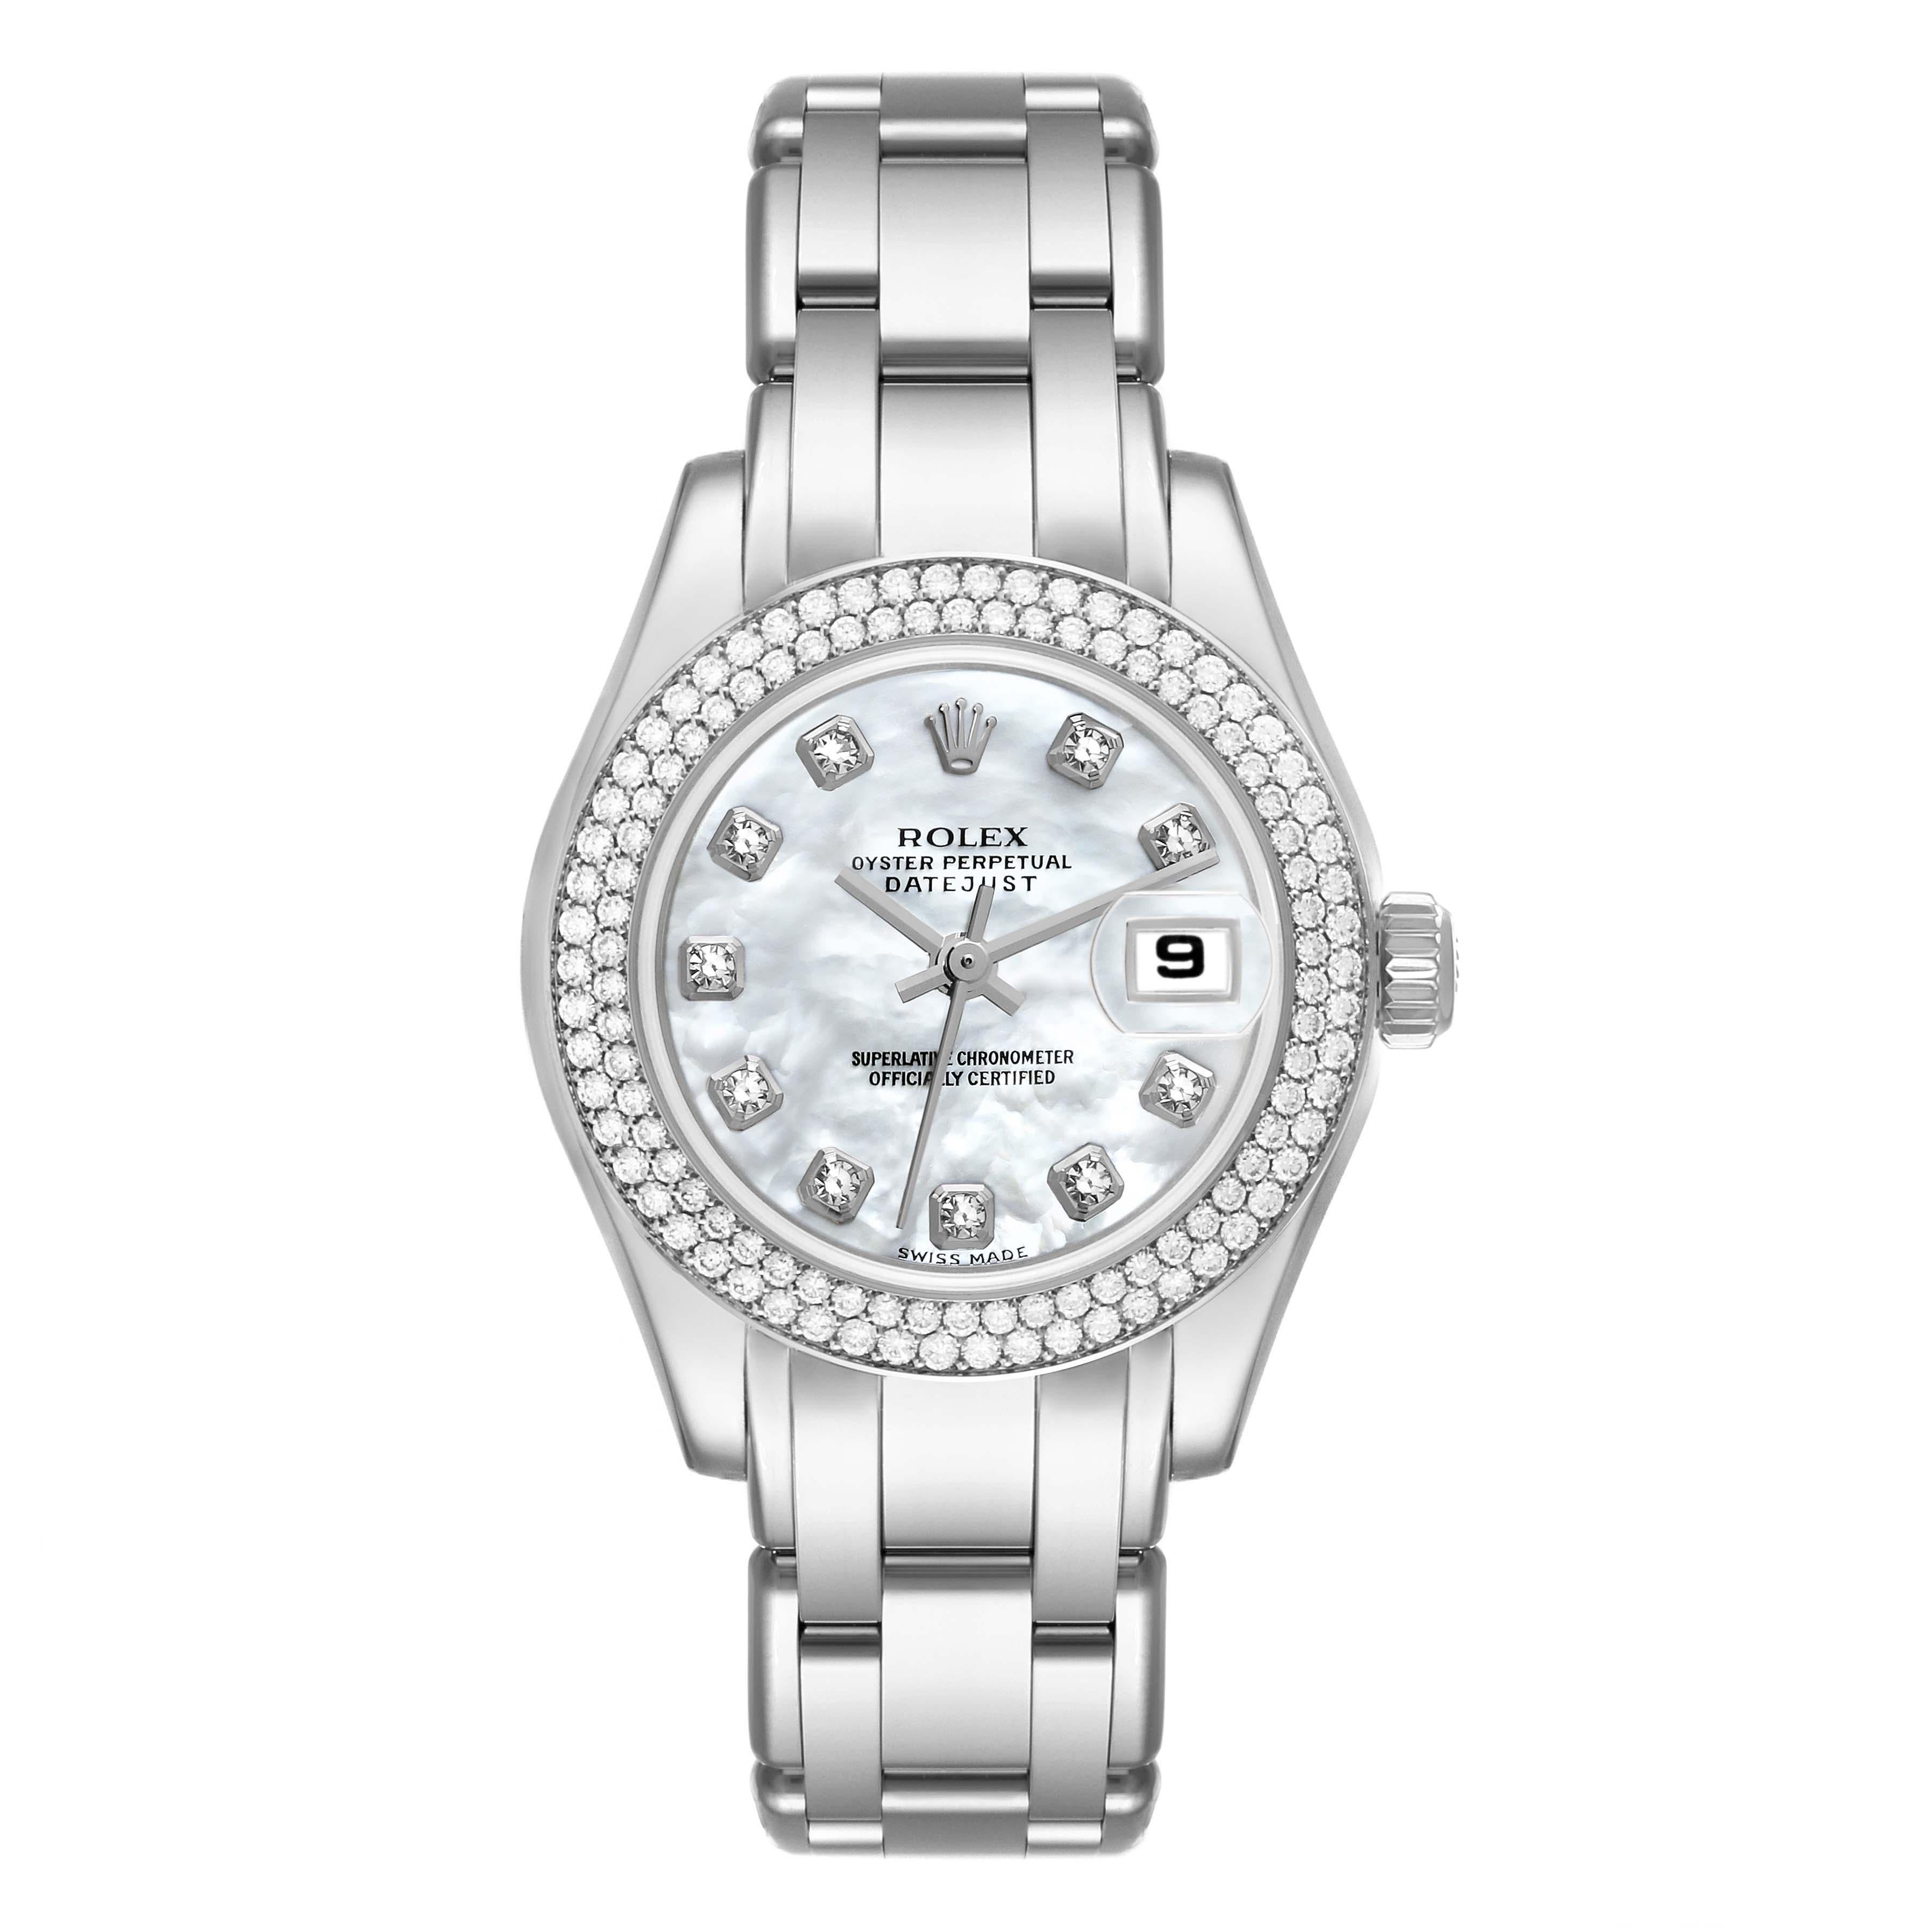 Rolex Pearlmaster White Gold MOP Diamond Ladies Watch 80339 Box Papers. Officially certified chronometer automatic self-winding movement. 18k white gold oyster case 29.0 mm in diameter. Rolex logo on the crown. Bezel set with two rows of original